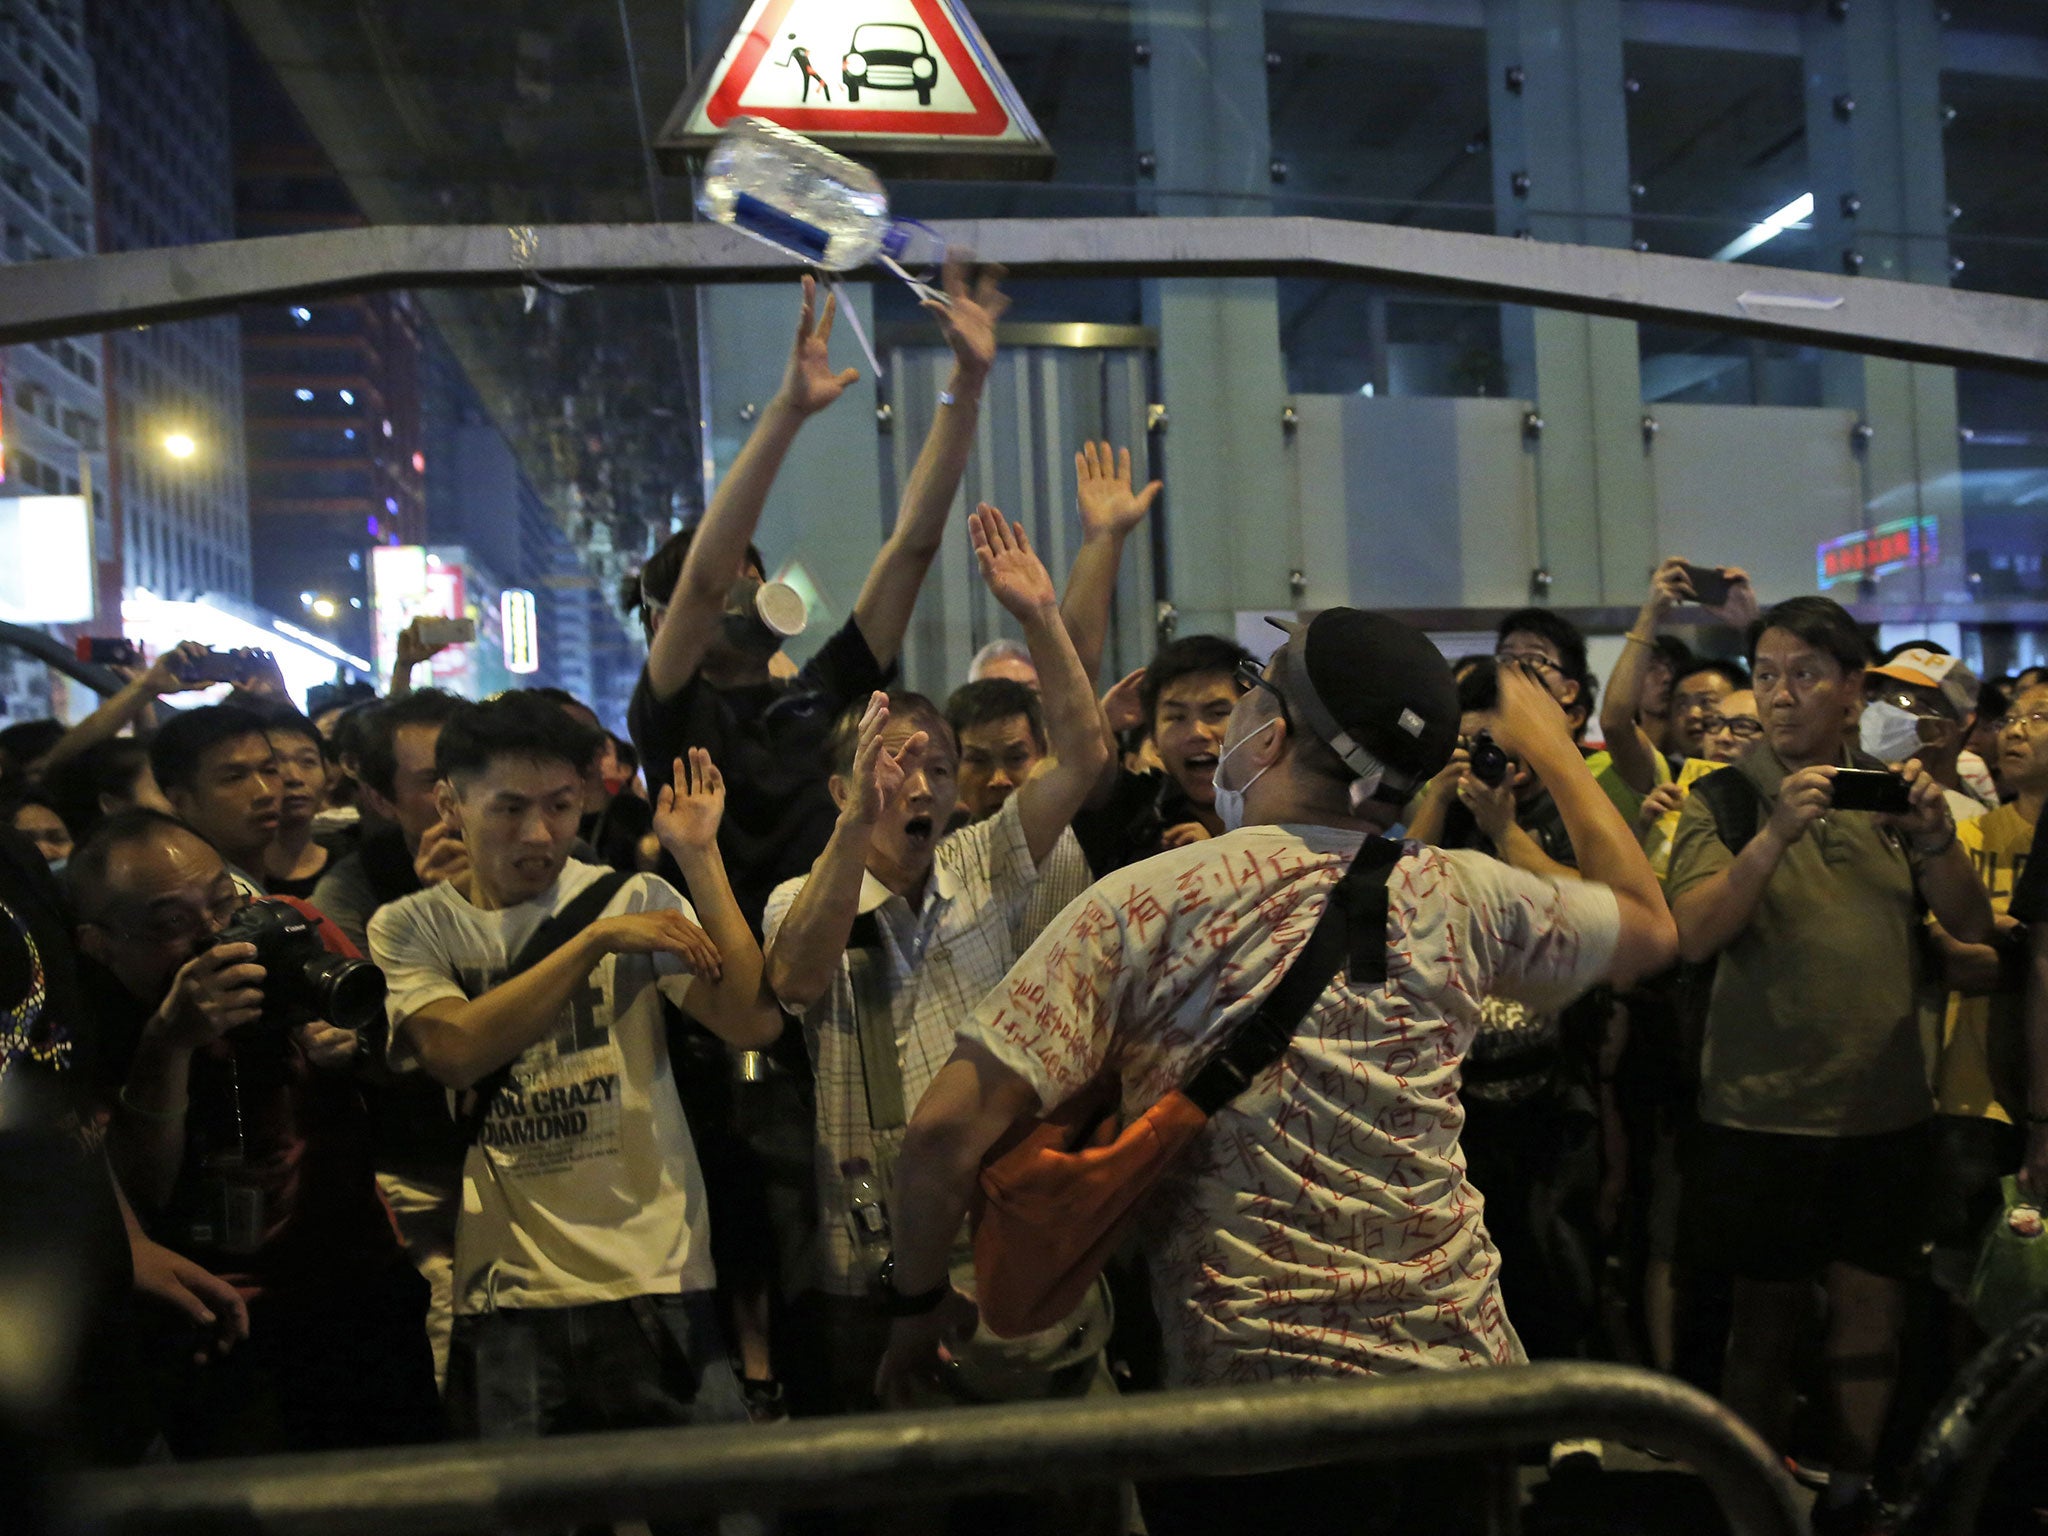 An anti-occupation protester throws a bottle of water at the crowd in the occupied area in the Mong Kok district of Hong Kong